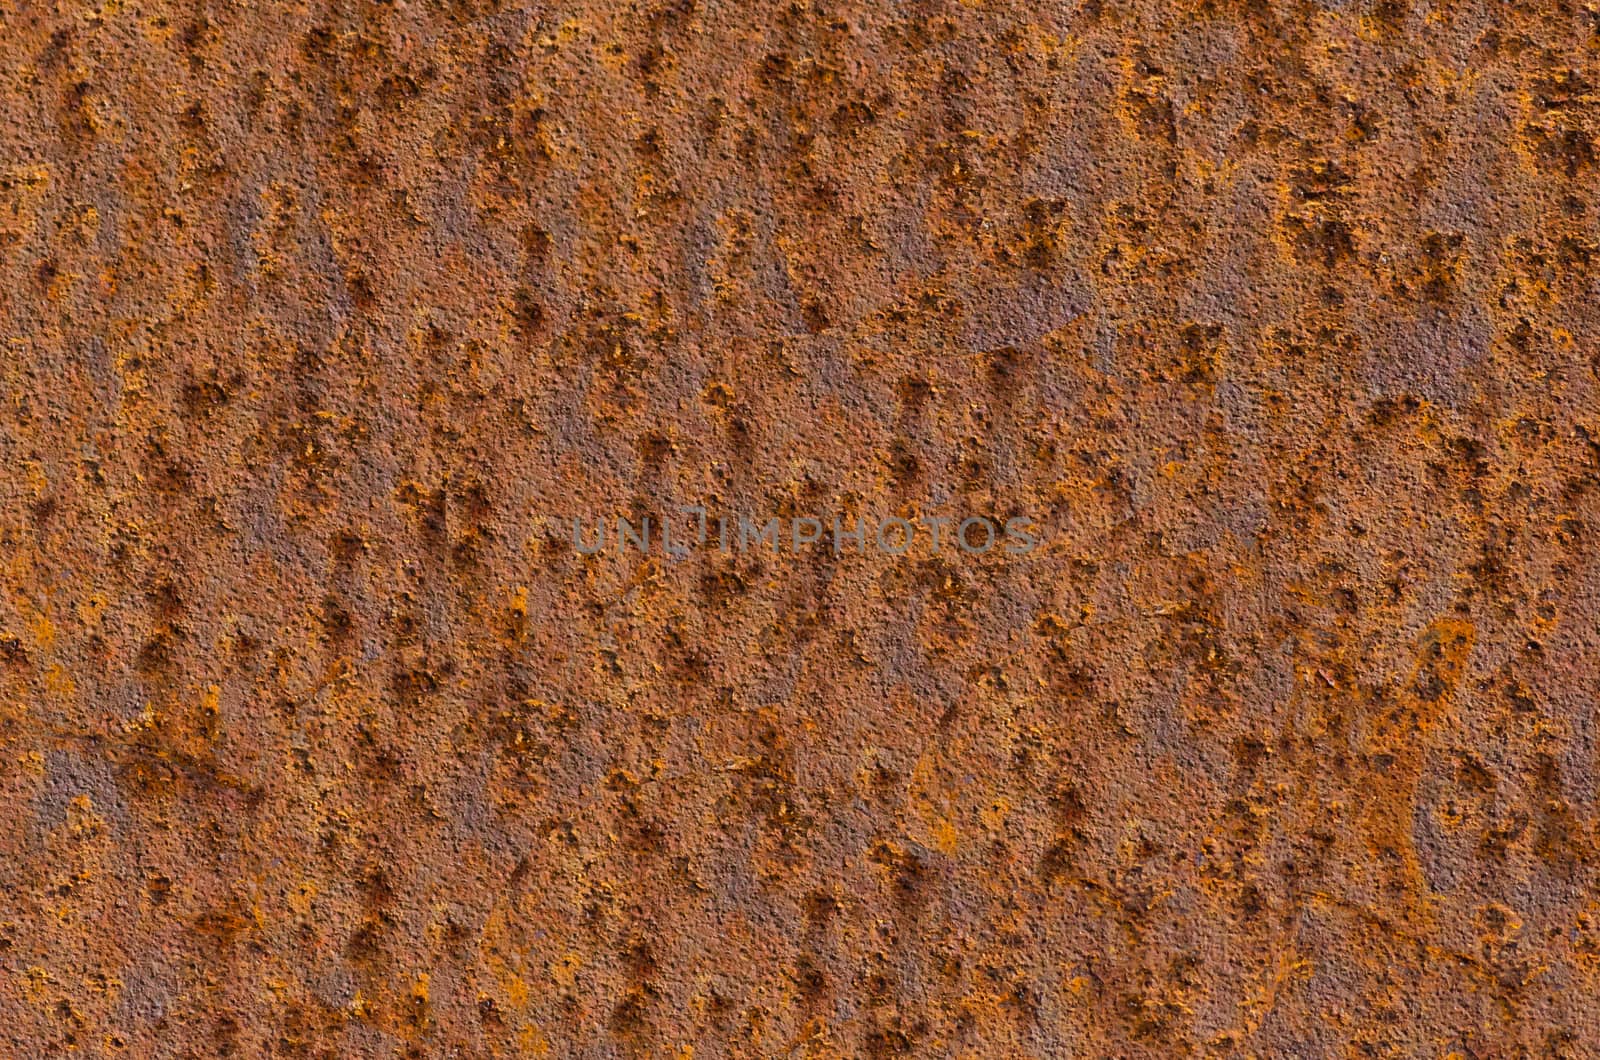 Rusty iron background by JFsPic